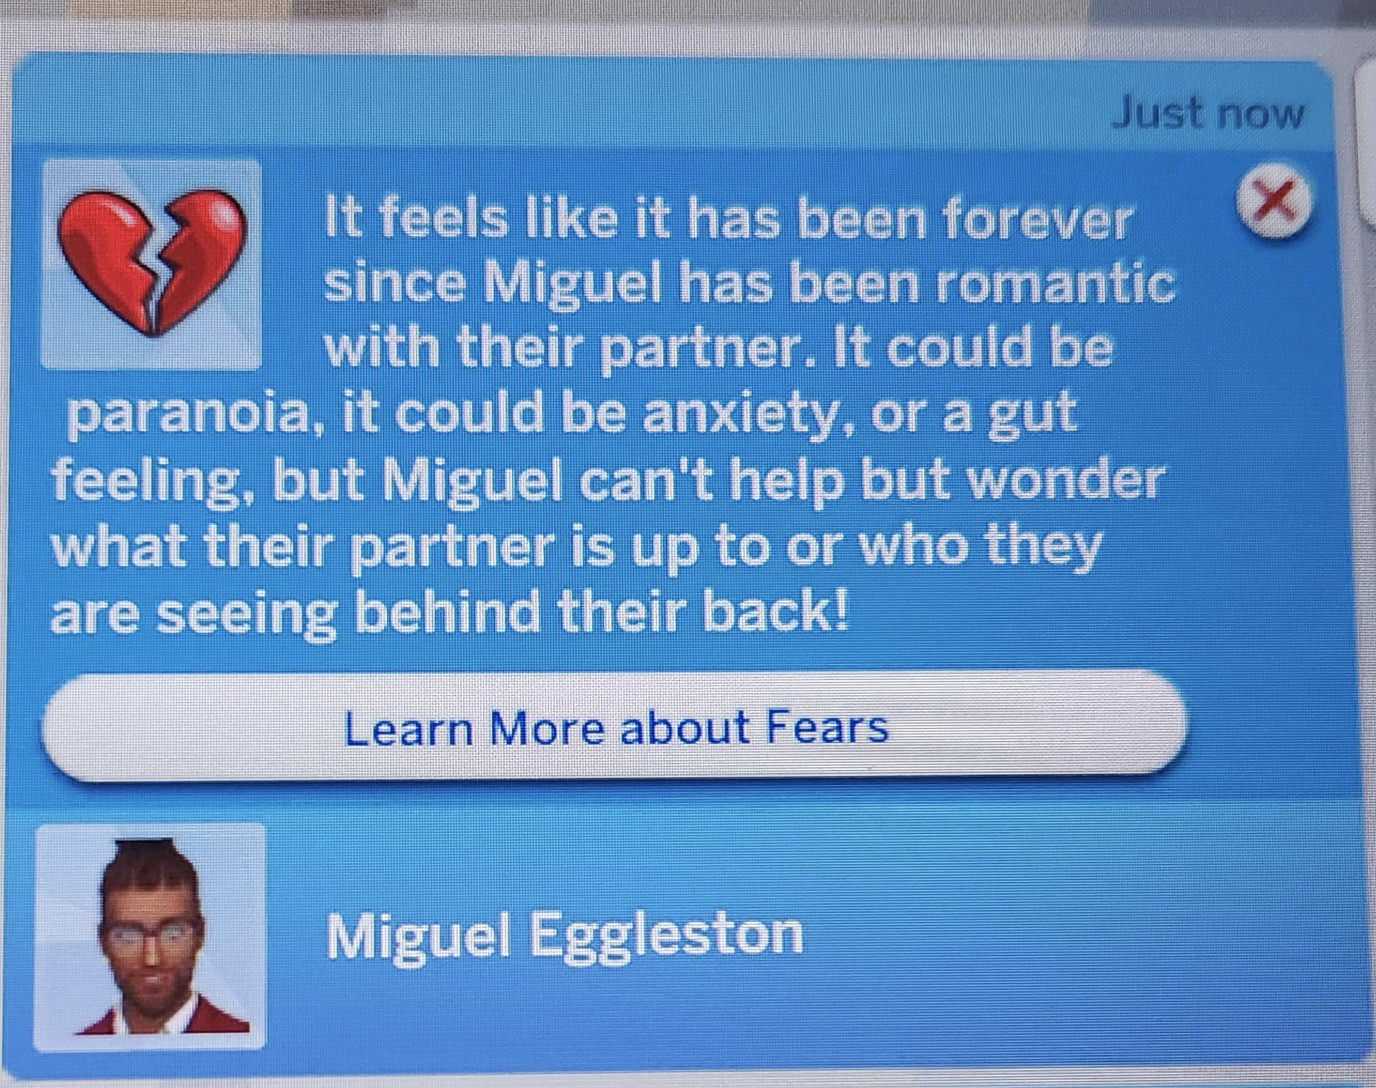 &quot;but Miguel can&#x27;t help but wonder what their partner is up to or who they are seeing behind their back!&quot;